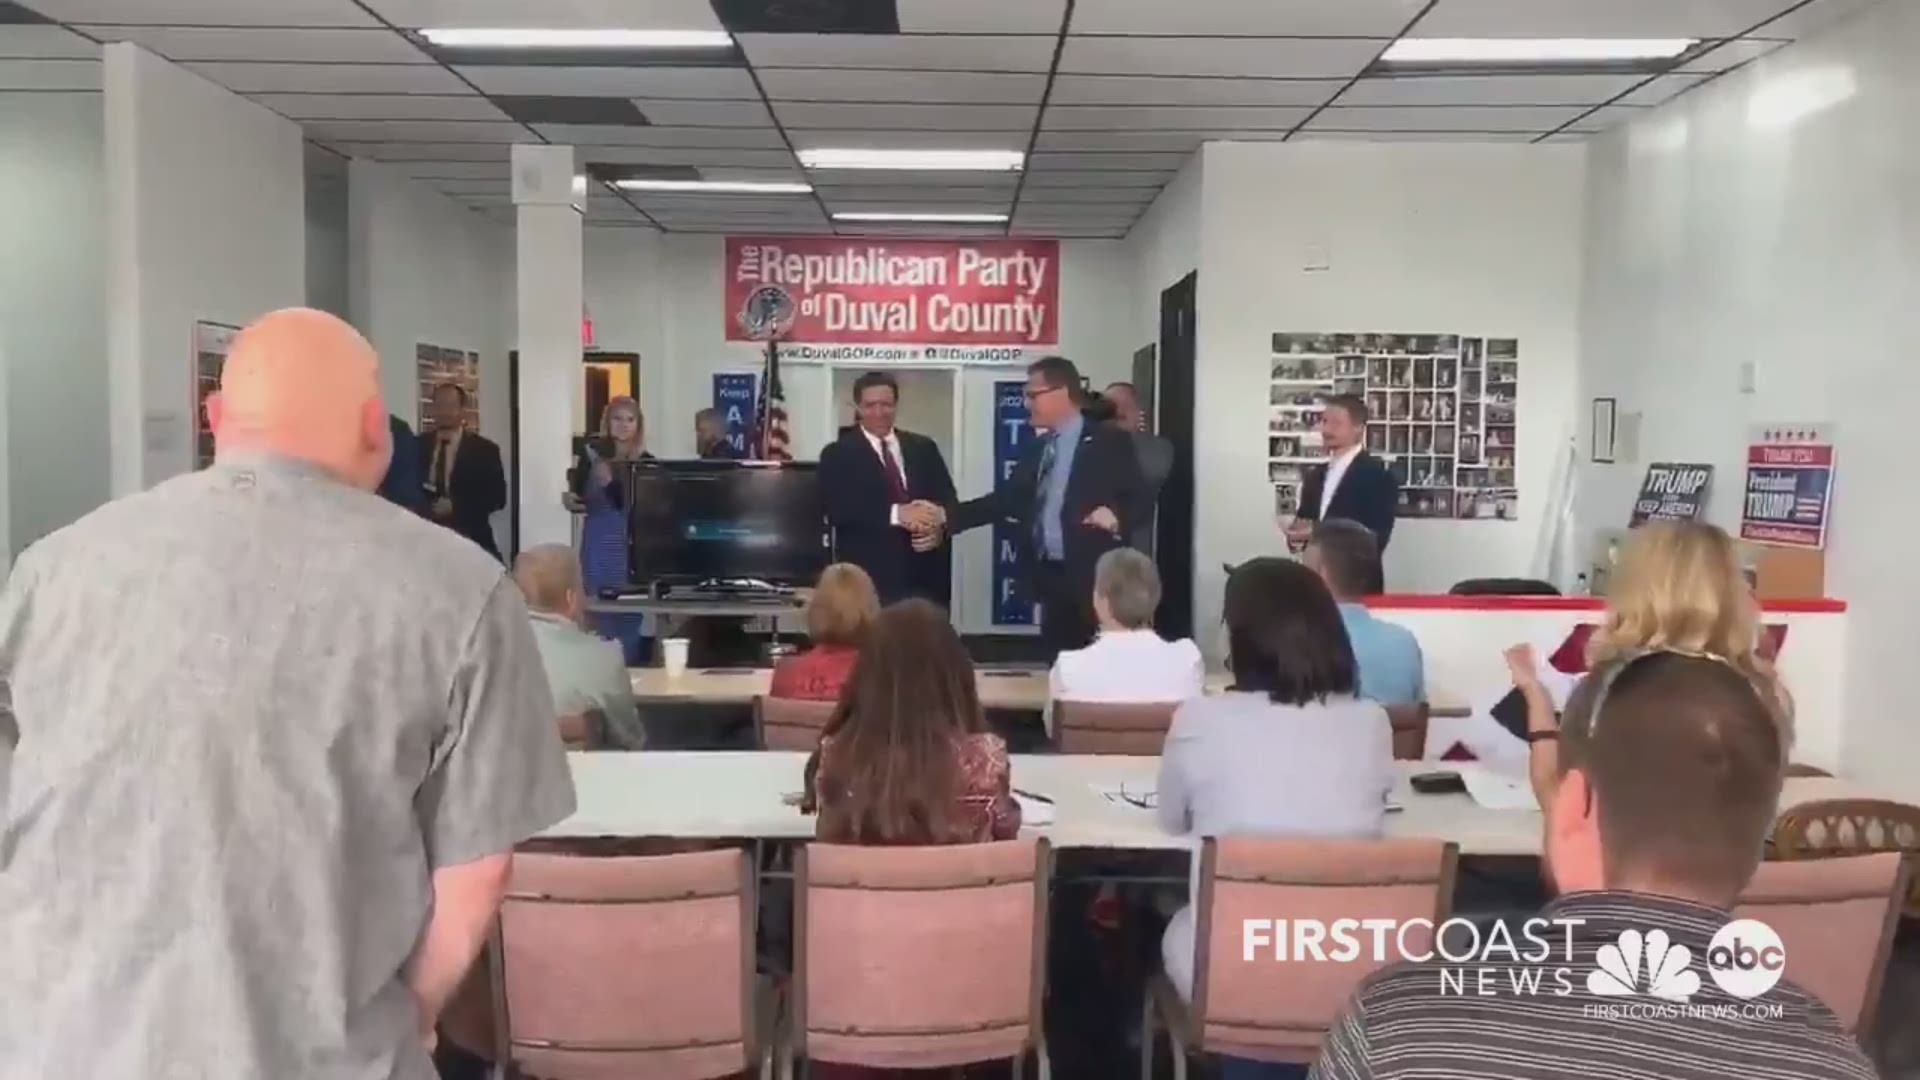 Florida Gov. Ron DeSantis surprised a group of Duval County Republican volunteers Wednesday with a bunch of "Keep America Great" hats signed by President Trump.